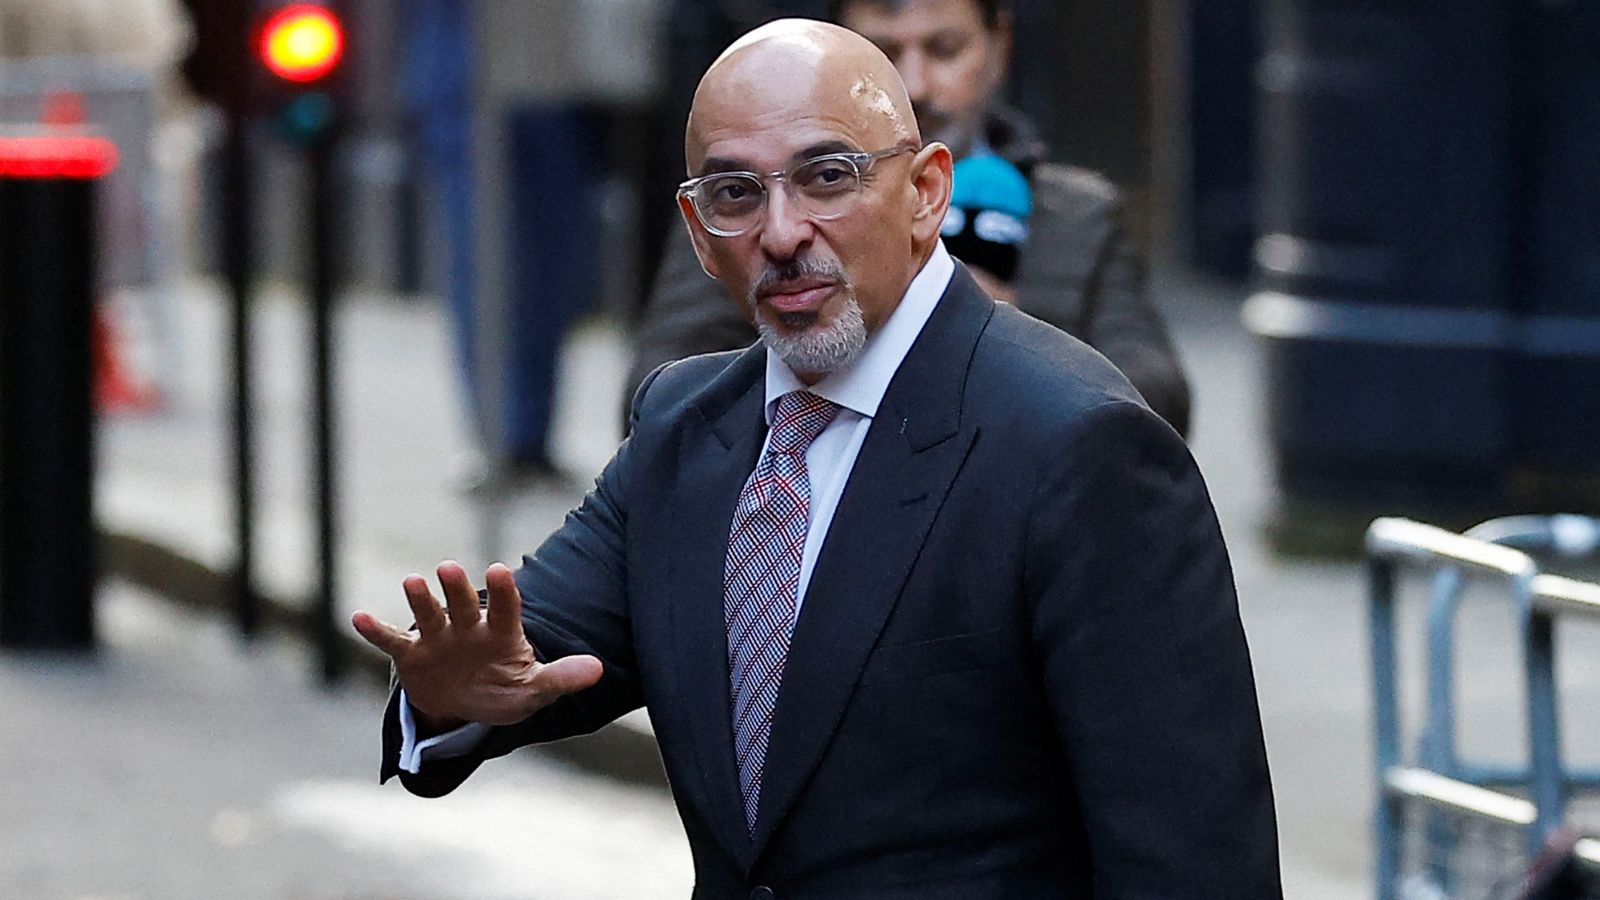 Nadhim Zahawi: Questions remain over former chancellor's 'seven-figure settlement' with HMRC